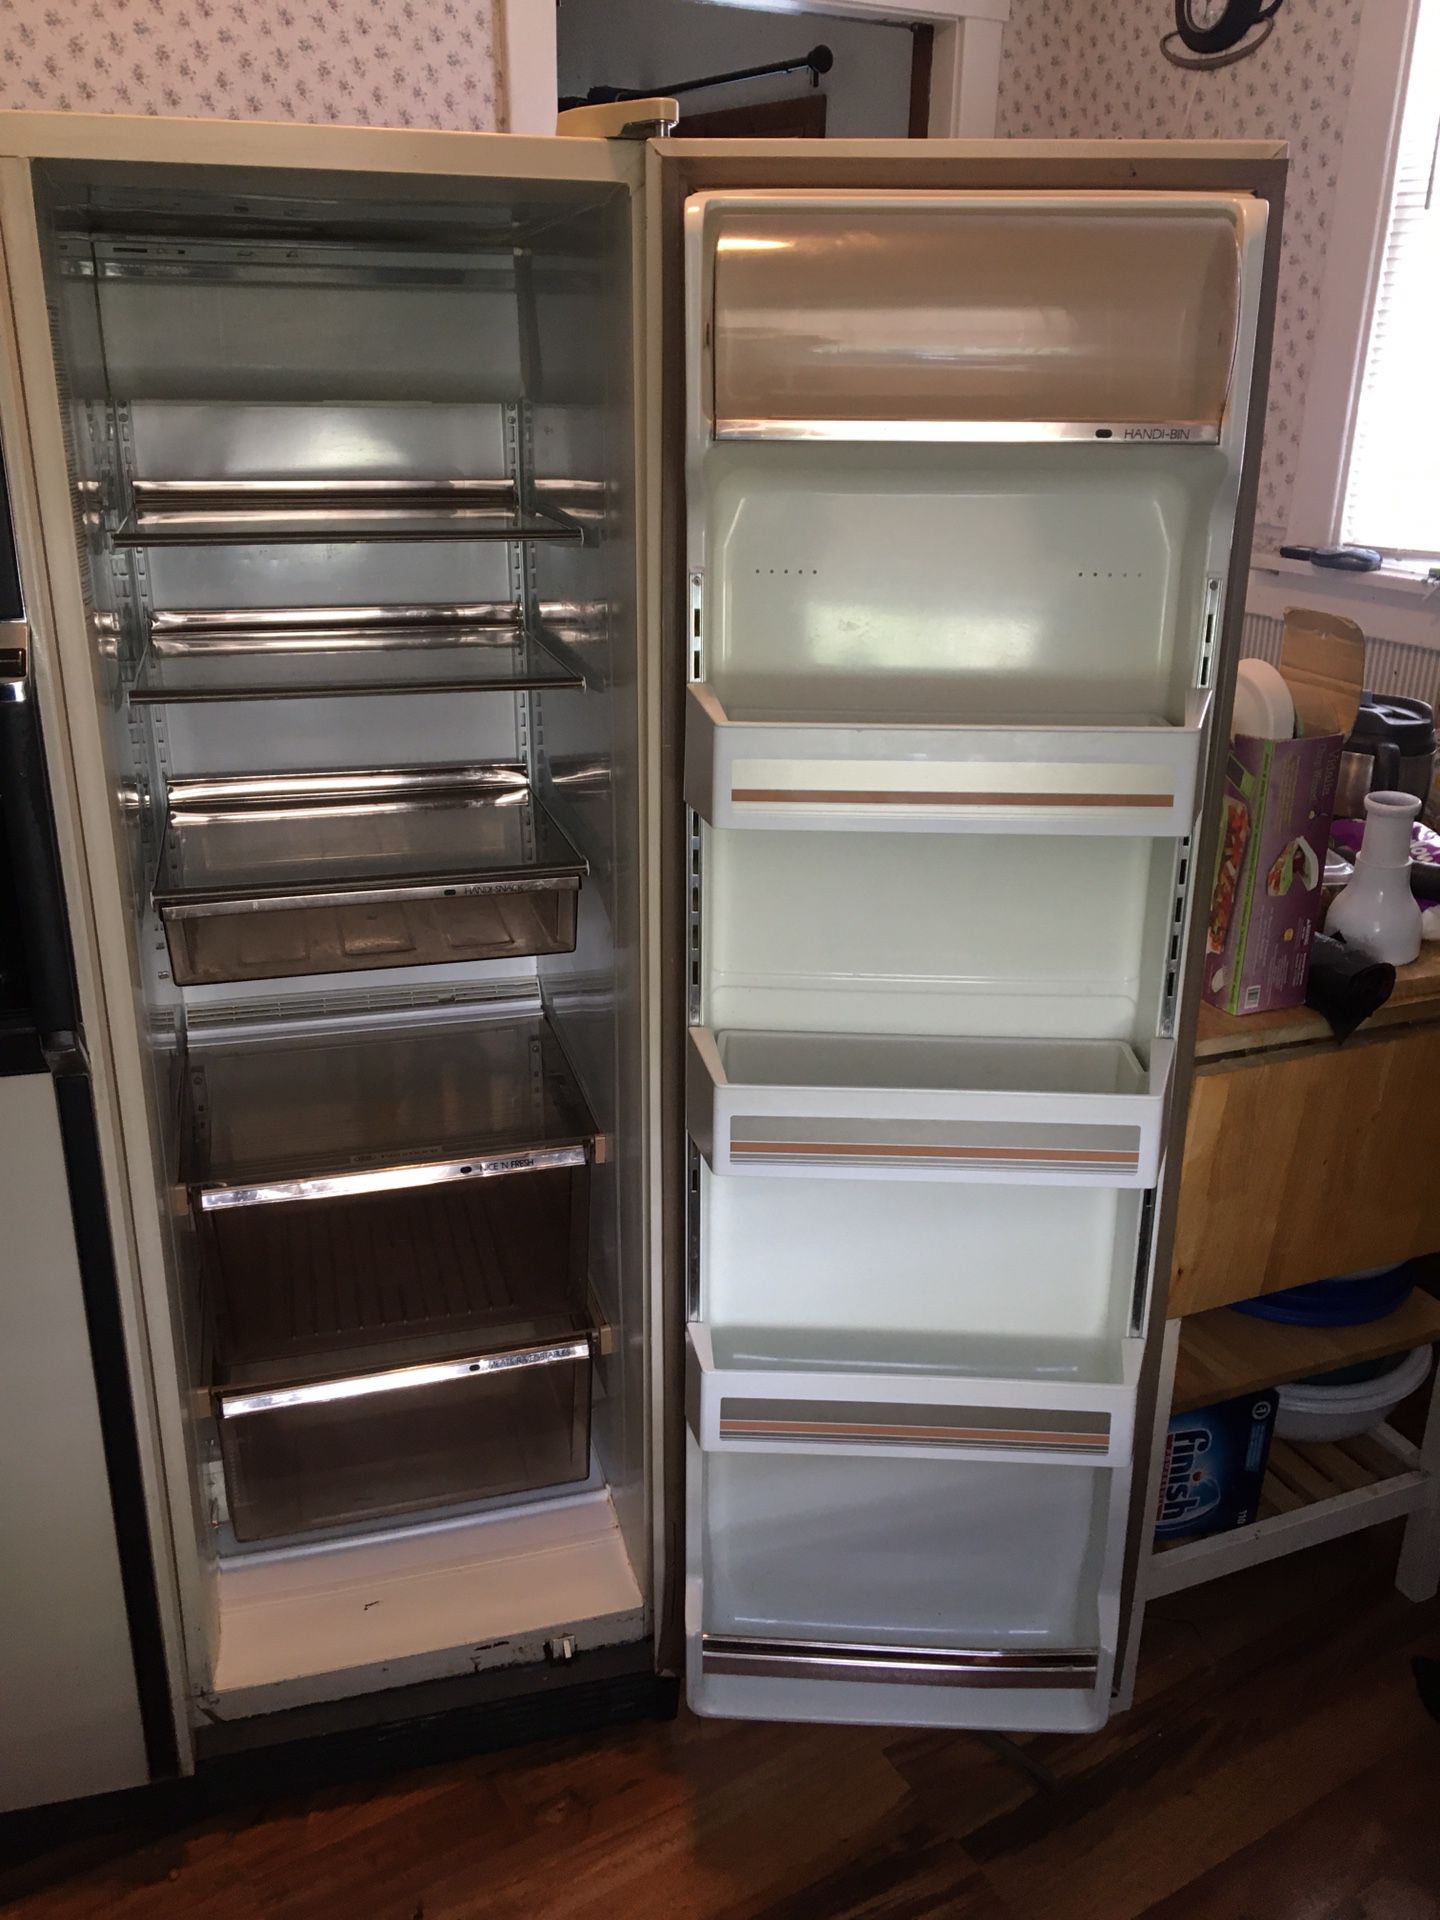 Kenmore 22 side by side refrigerator W/ ice and water door dispenser